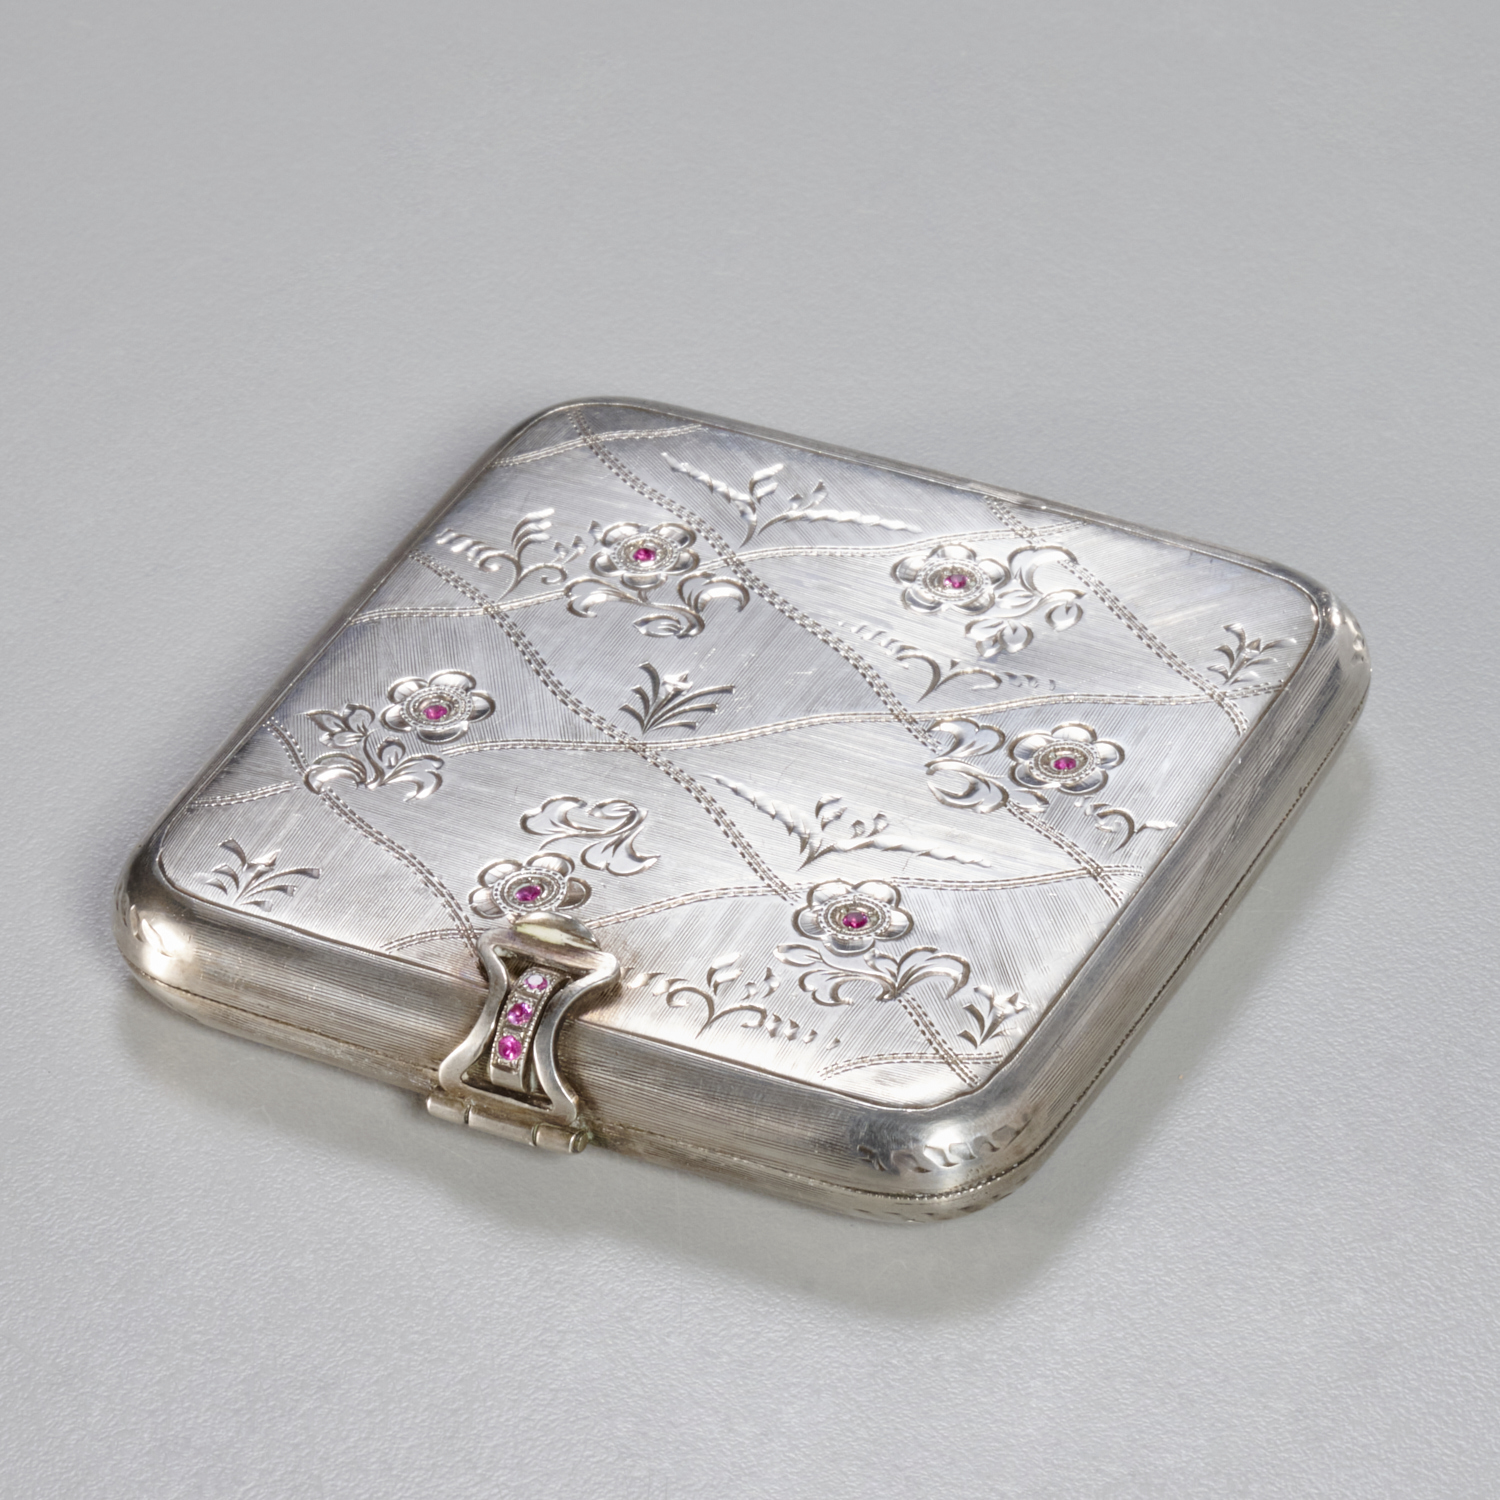 800 SILVER JEWELED COMPACT Early